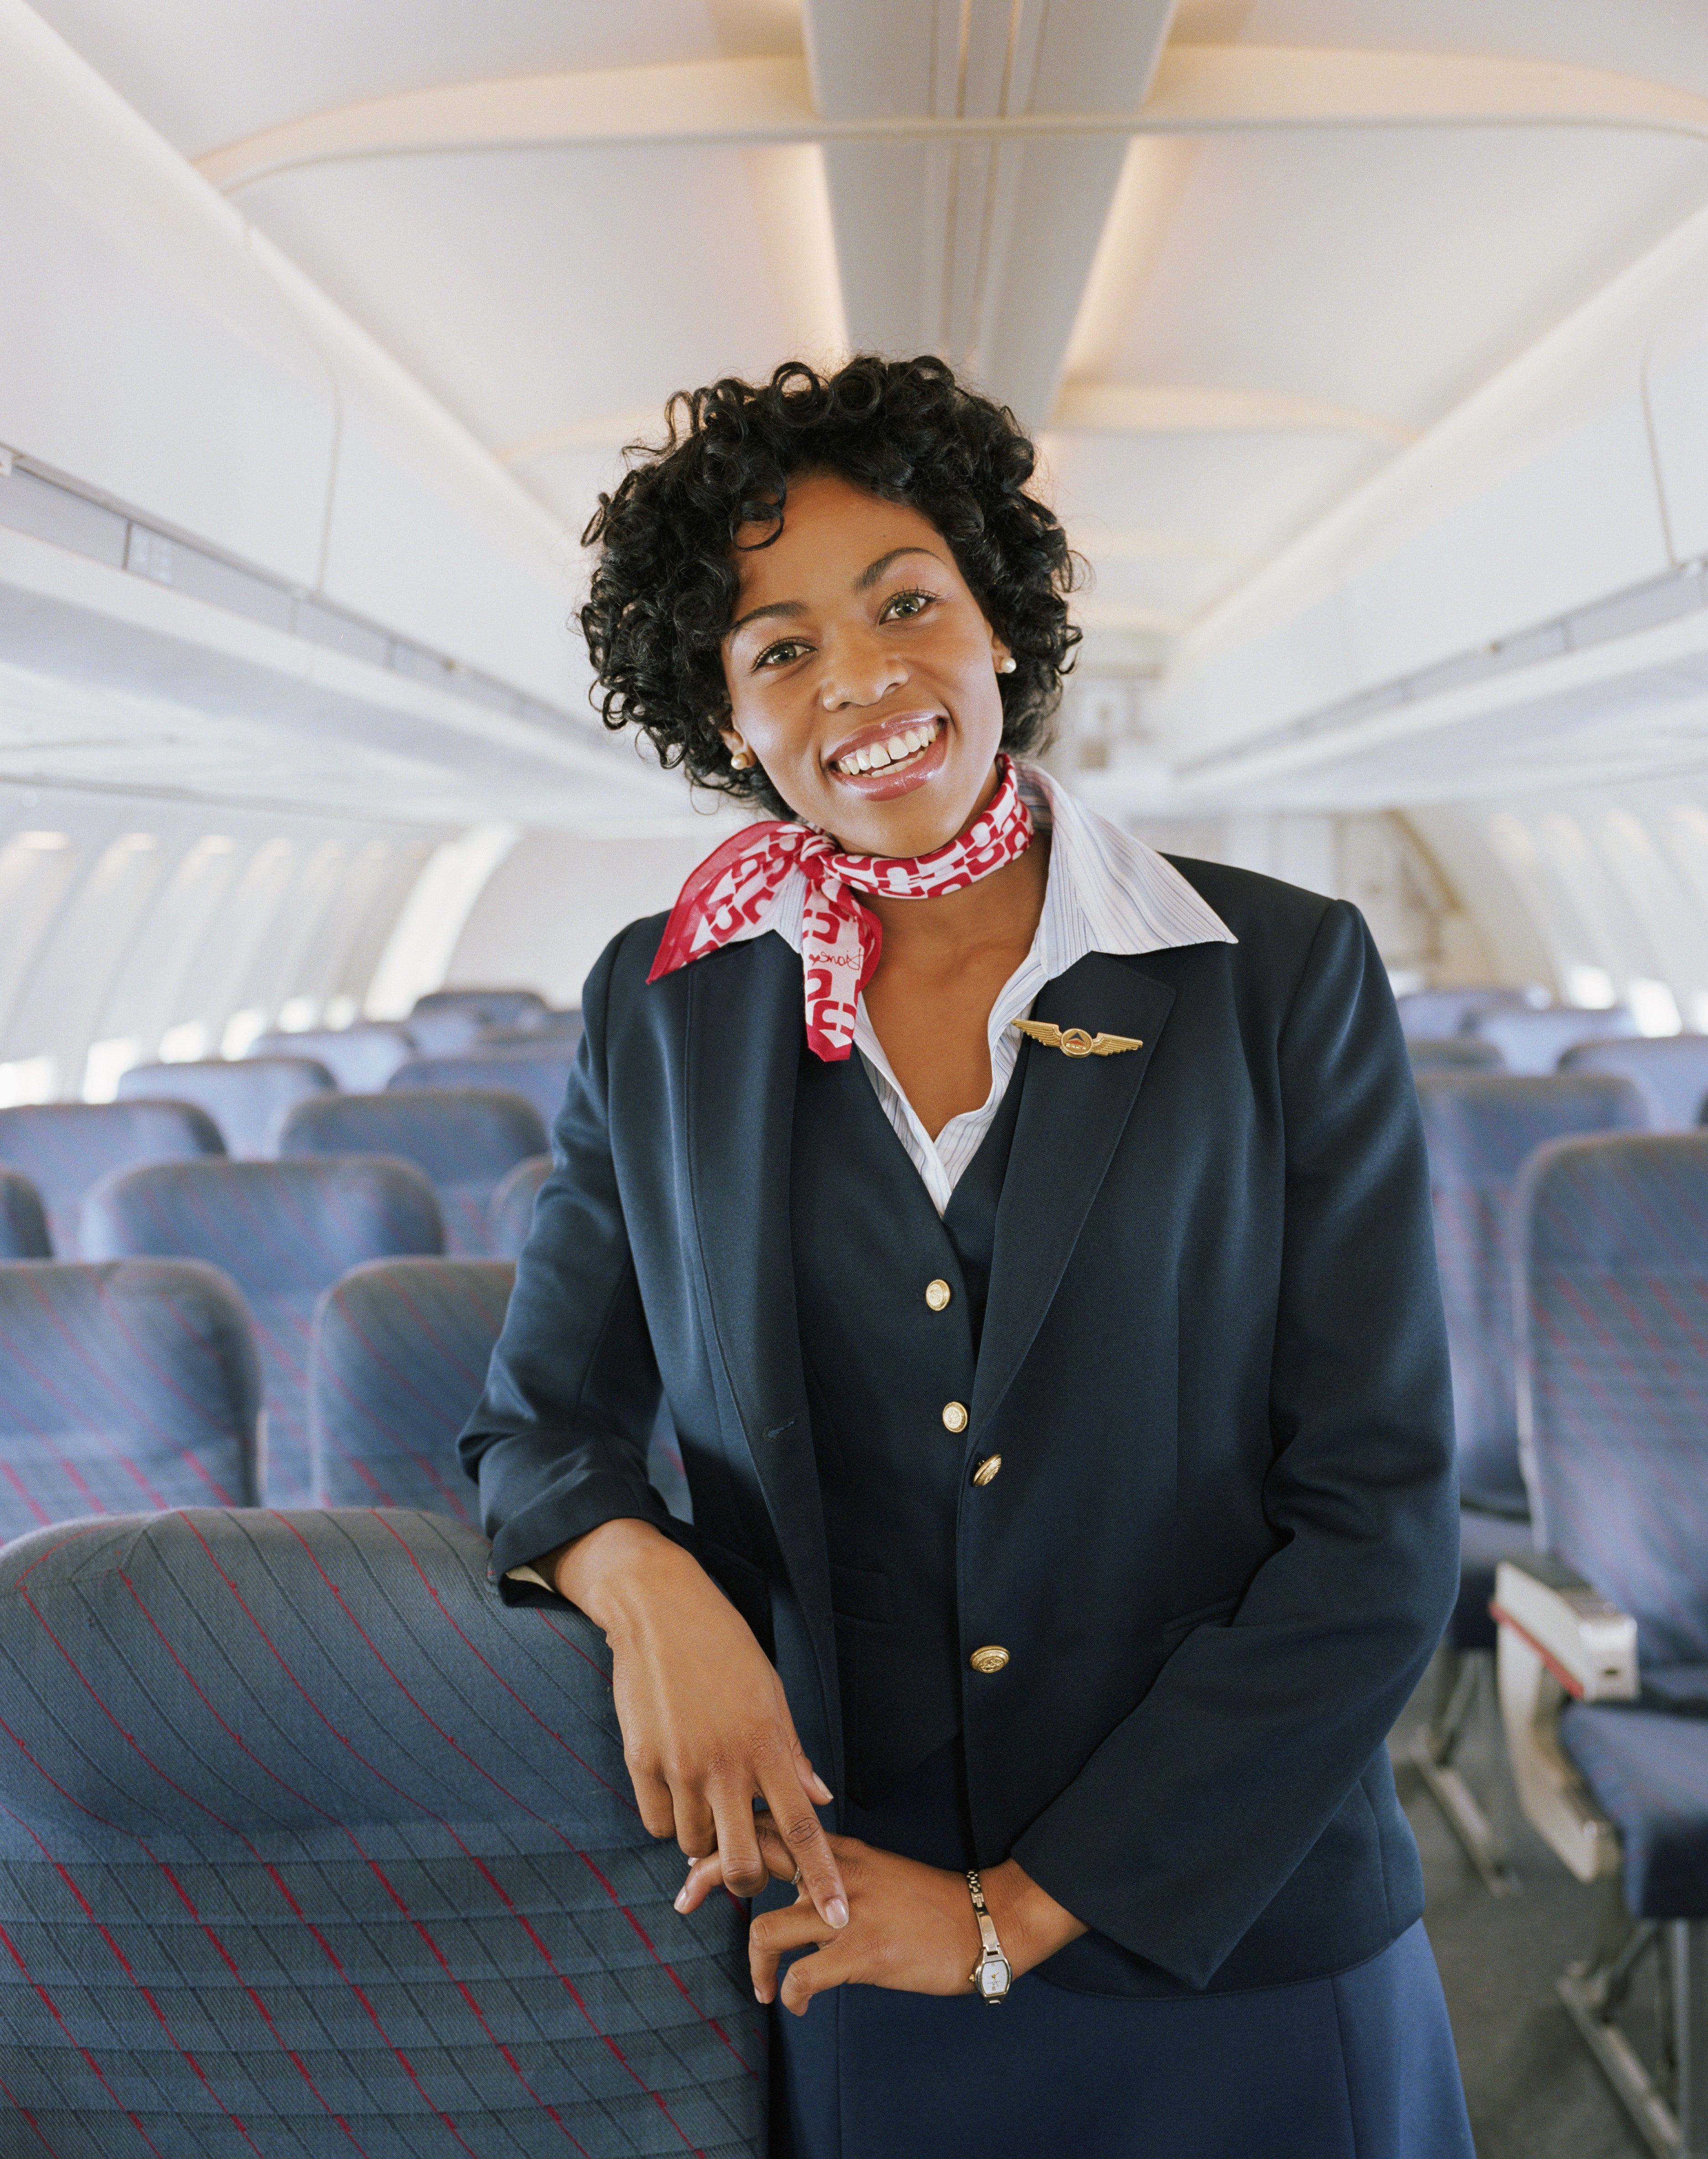 Flight Attendants Reveal All The Places You Don’t Want to Touch on a Plane